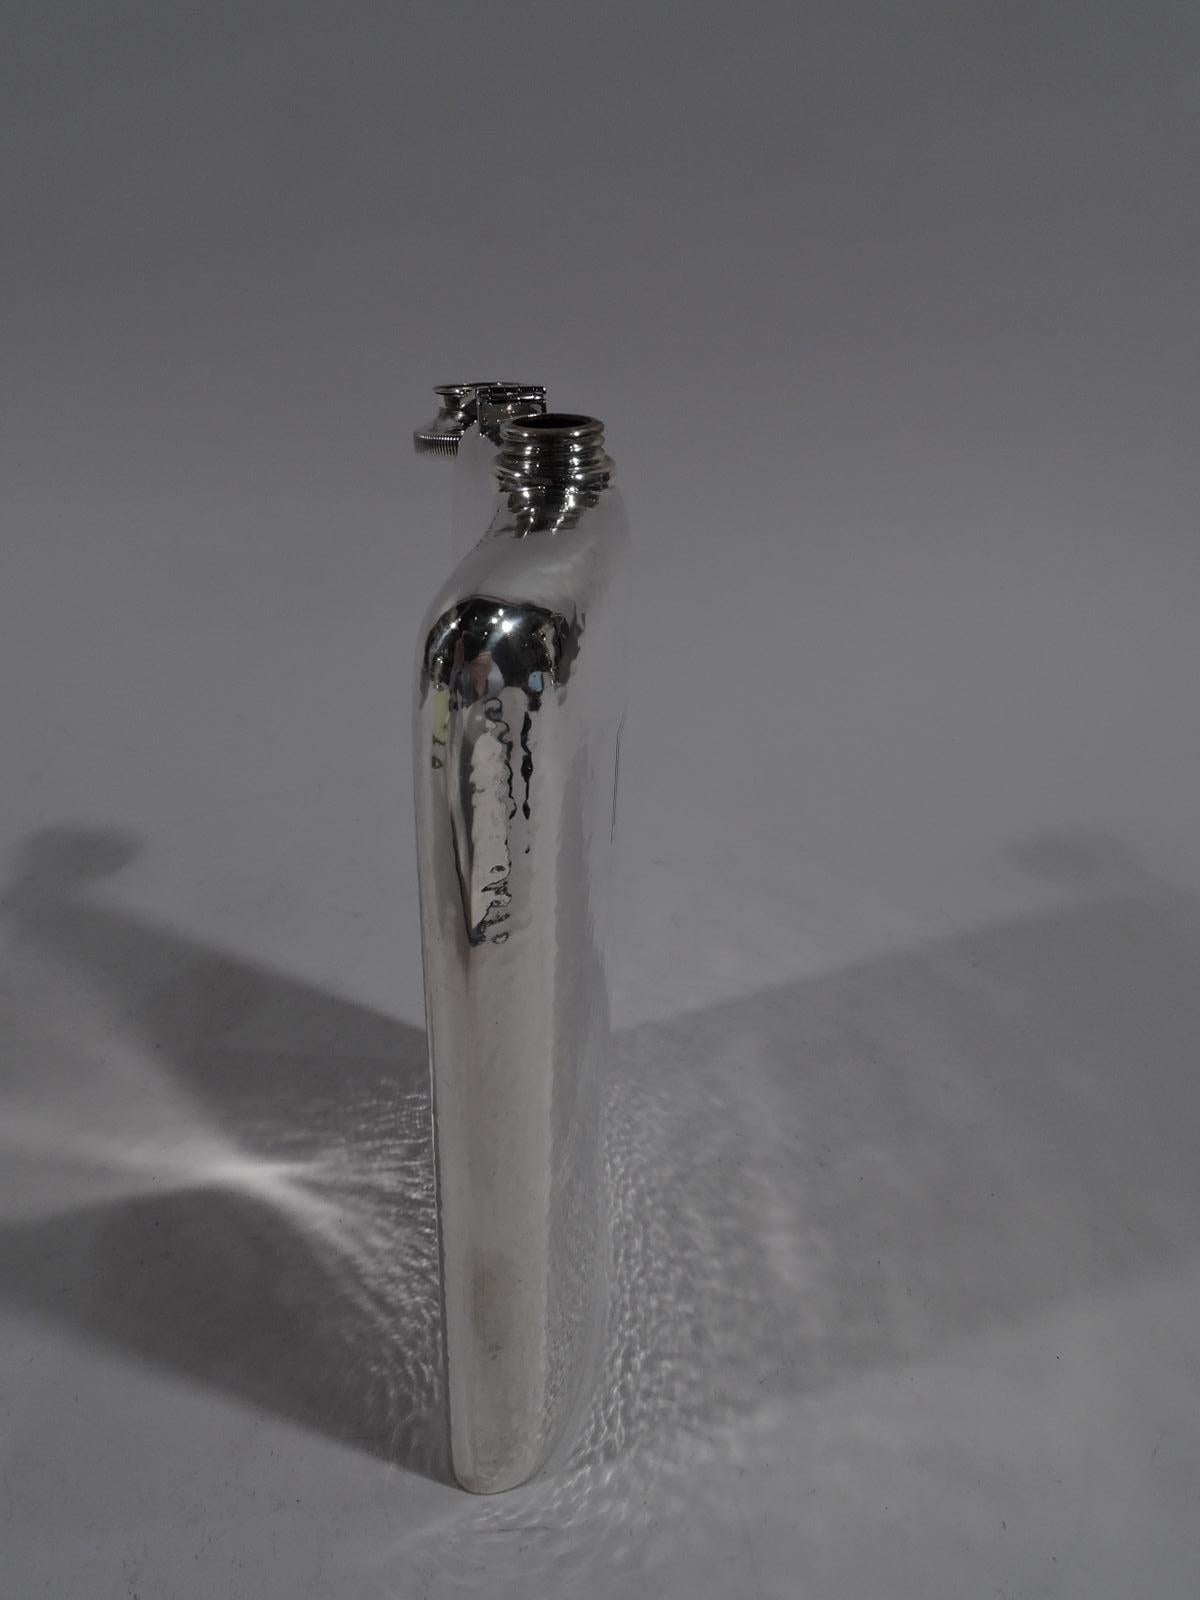 American Craftsman sterling silver flask. Made by Webster in North Attleboro, Mass., circa 1920. Curved rectilinear body with threaded and cork-lined cover. all-over hand hammering. Plain and engraved rectangular frame (vacant). Fully marked